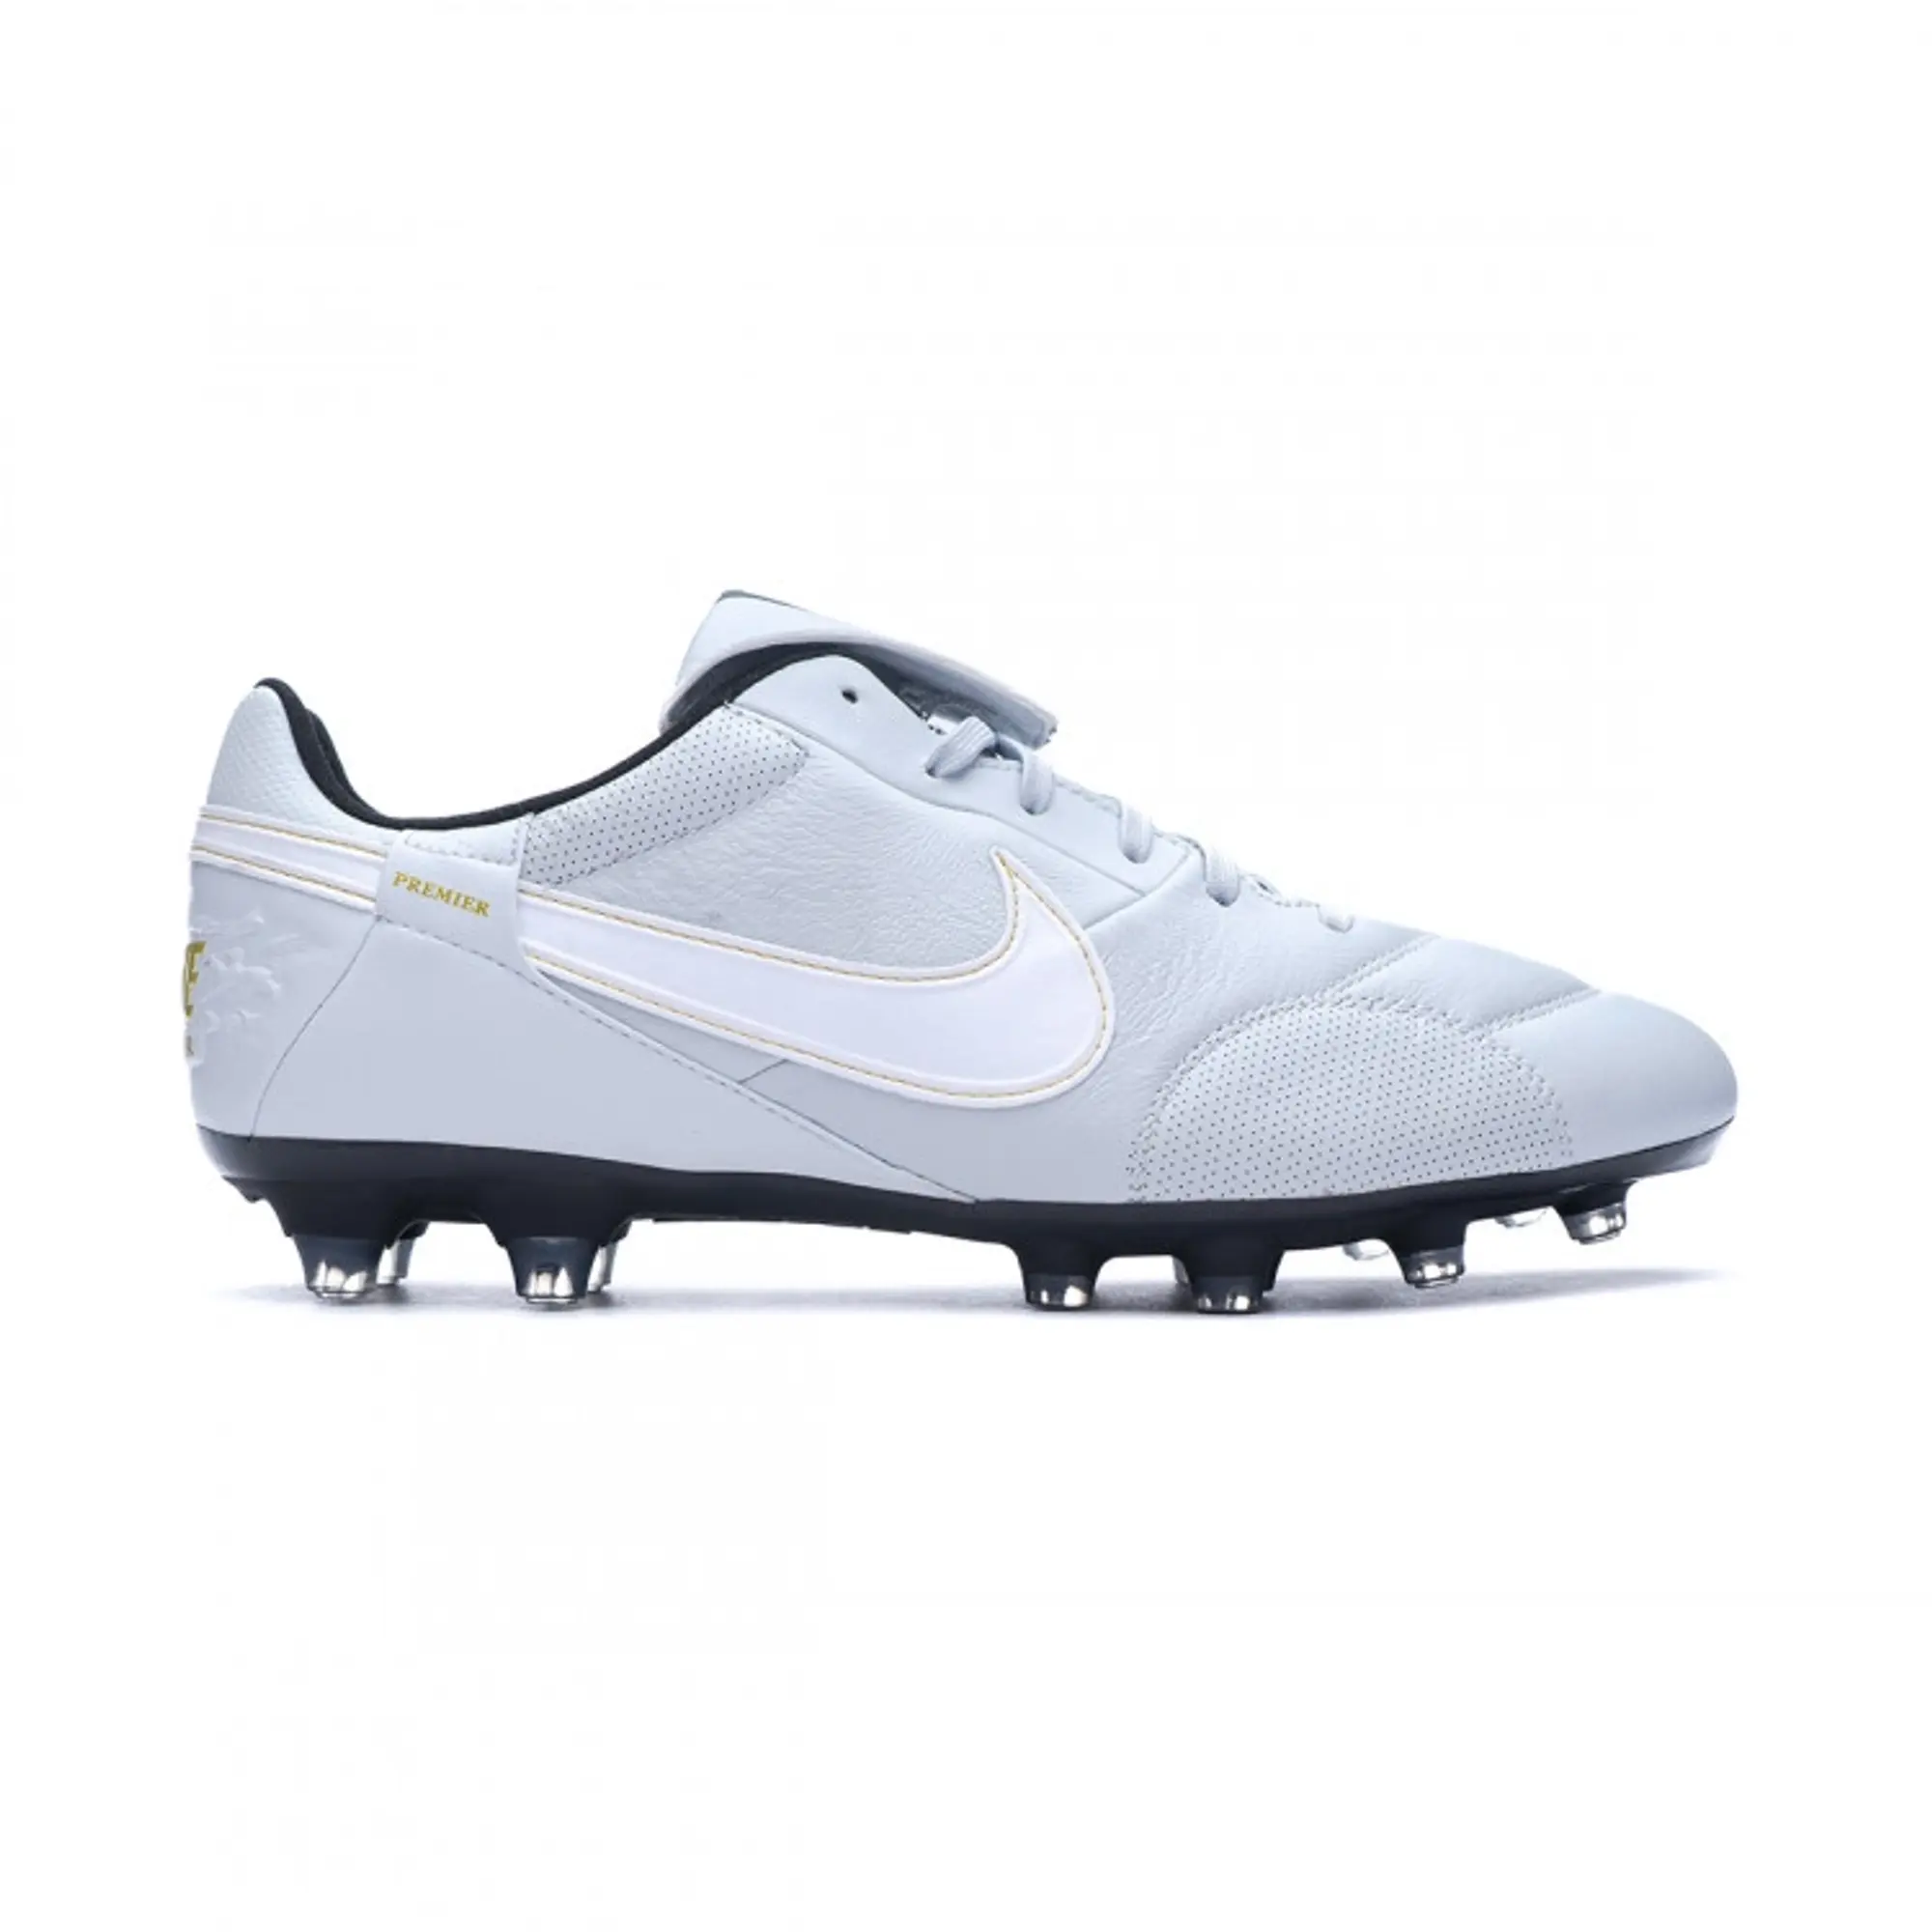 The Nike Premier 3 FG Firm-Ground Football Boots - Grey